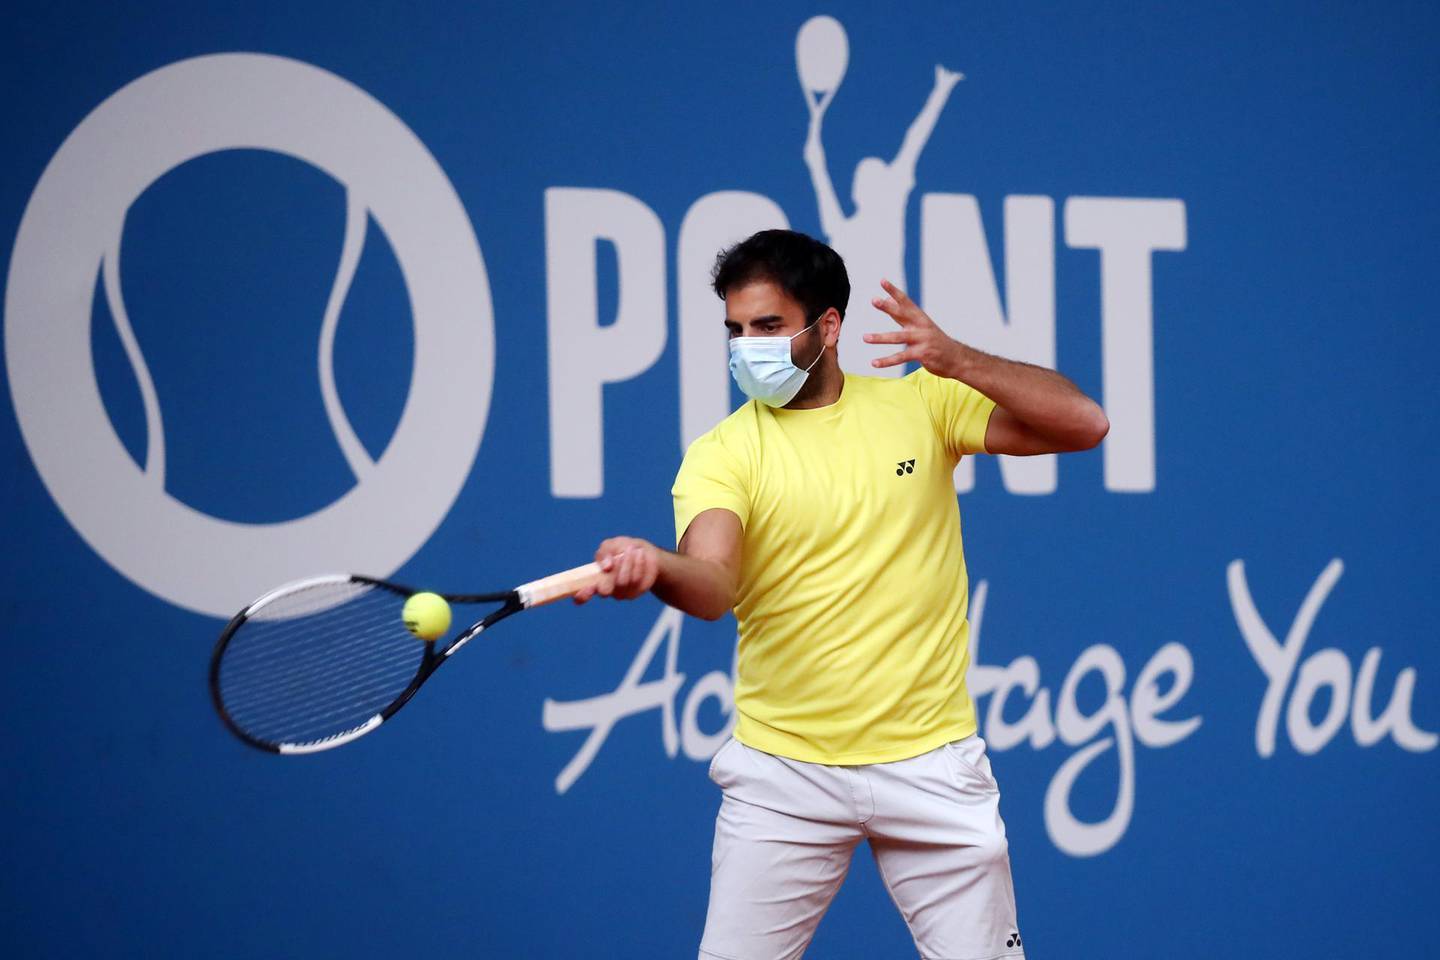 HOHR-GRENZHAUSEN, GERMANY - MAY 02: Benjamin Hassan of Germany wears a face mask as he warms up during day 2 of the Tennis Point Exhibition Series on May 02, 2020 in Hohr-Grenzhausen, Germany. The tournament is the first since the suspension of all matches at the beginning of March and one of the first non-virtual sporting events held during the Coronavirus crisis. (Photo by Alex Grimm/Getty Images)